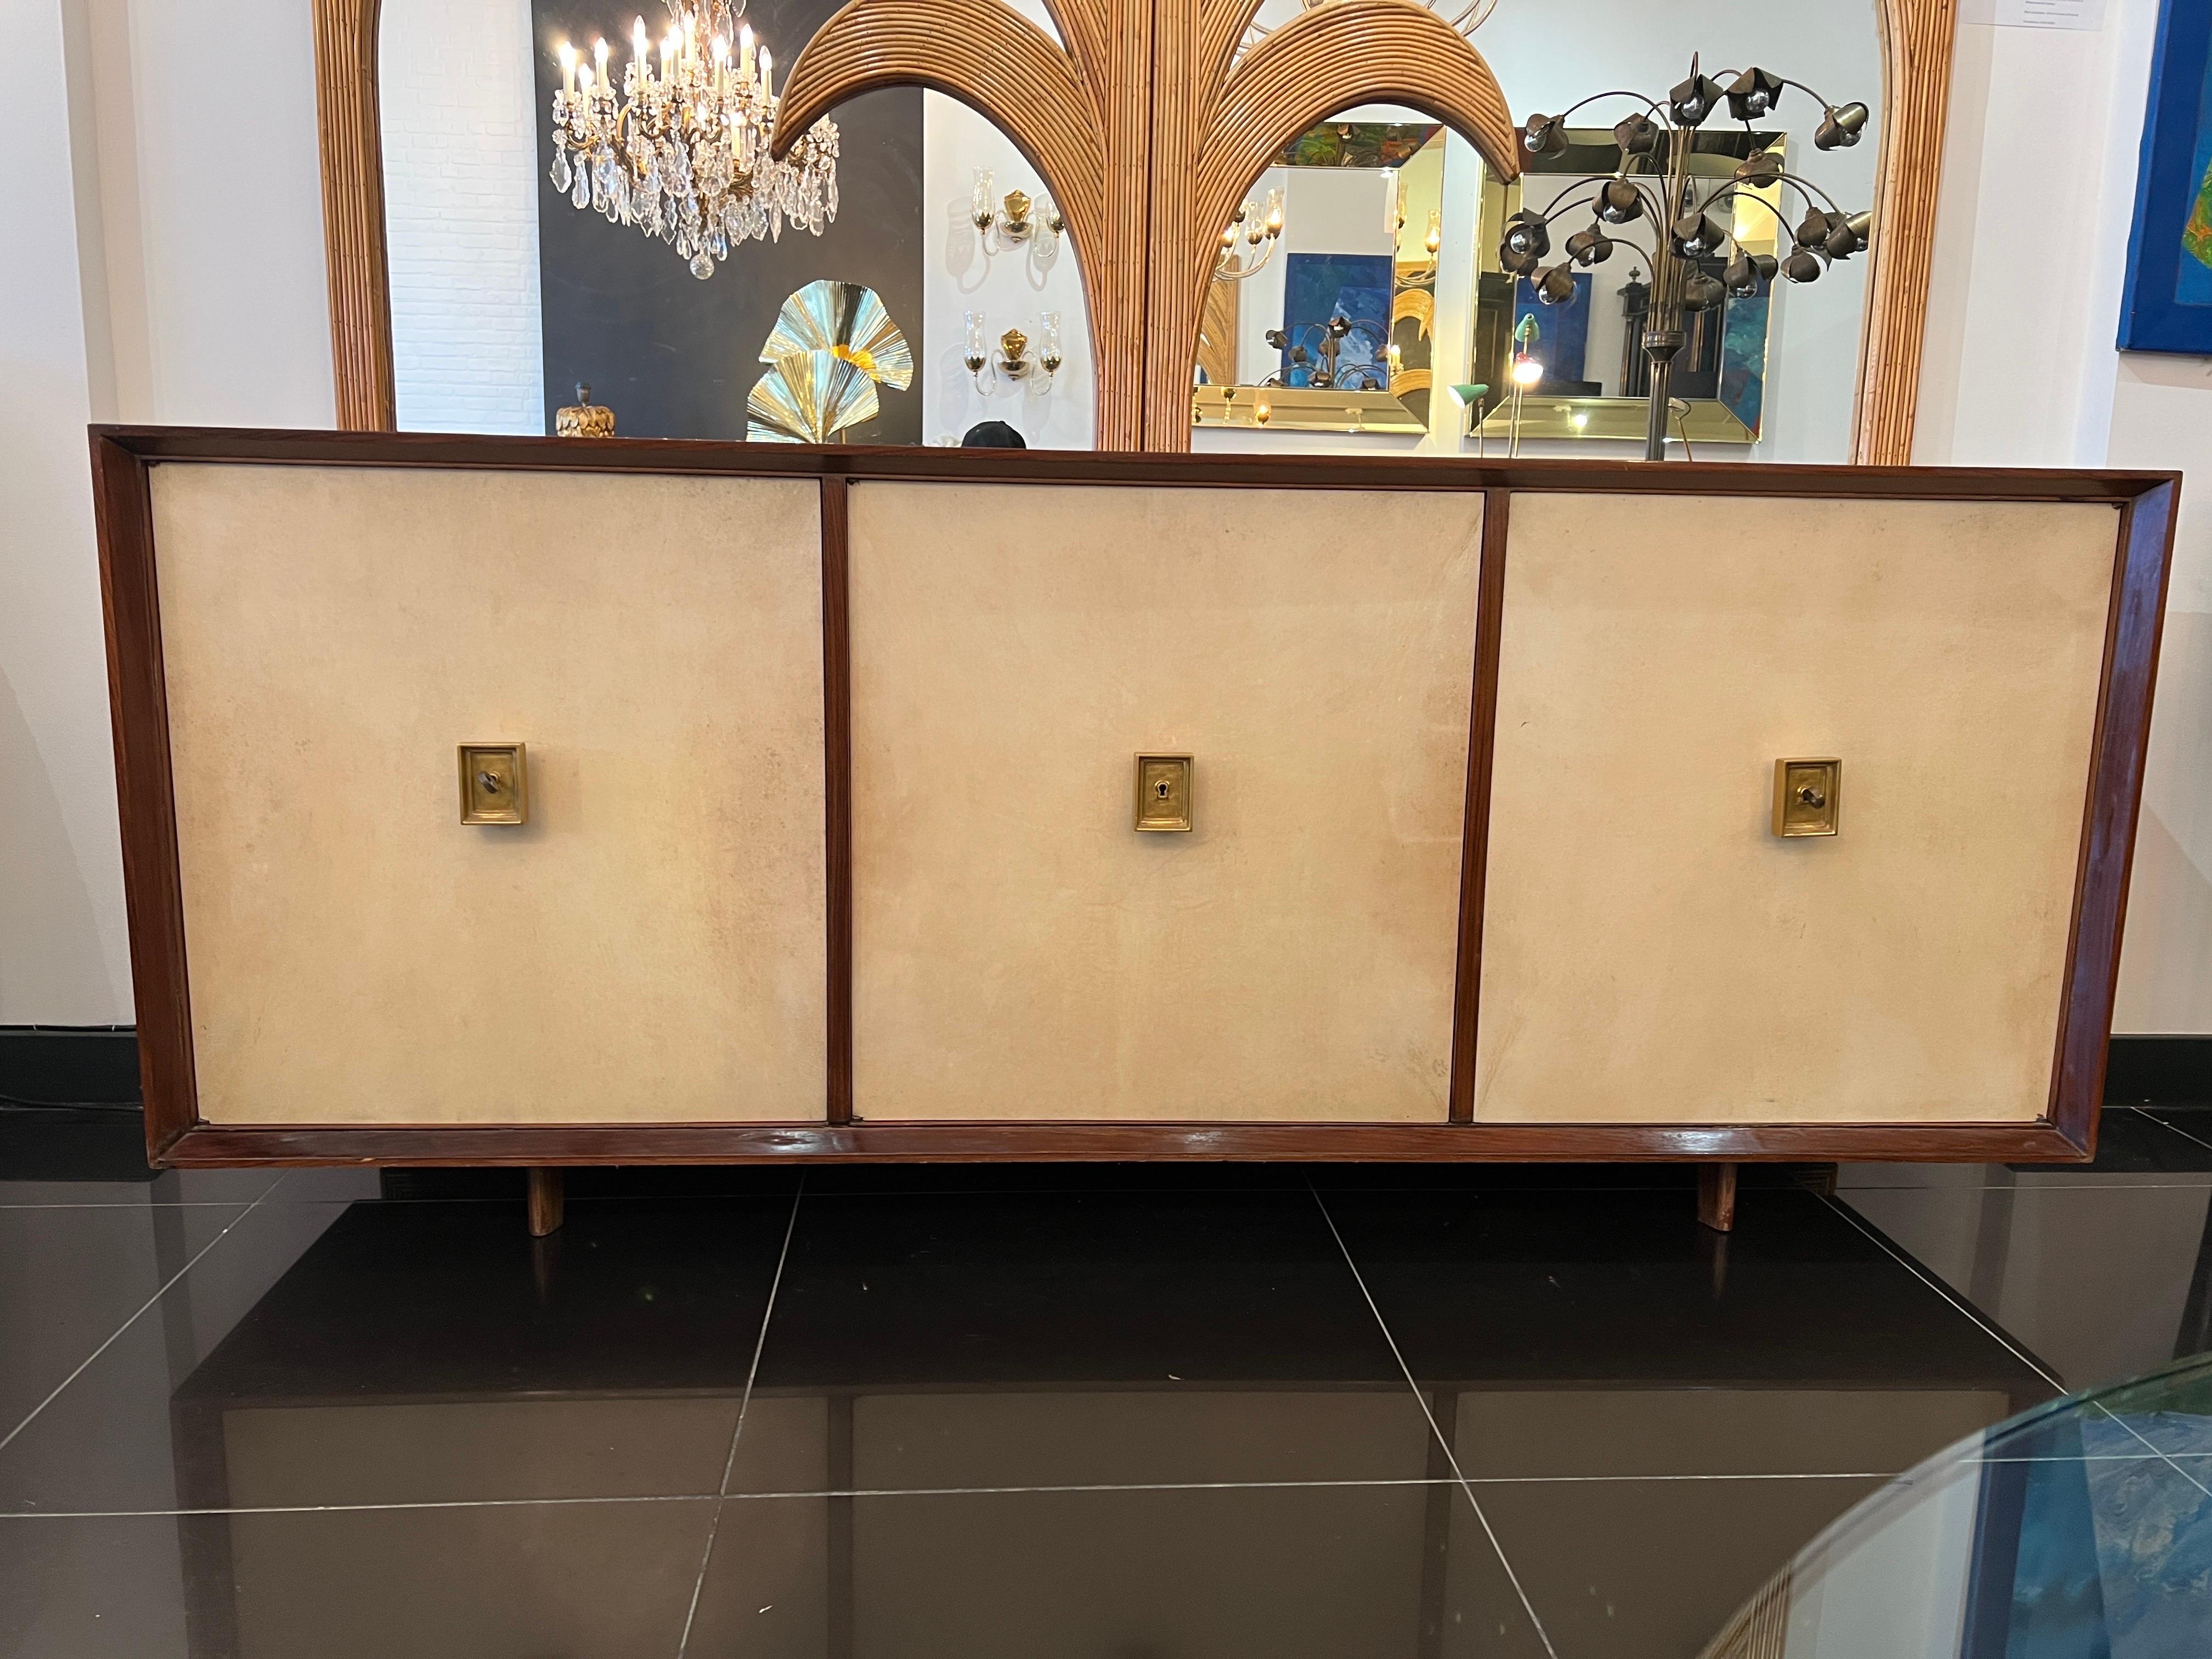 A rare French Art Deco sideboard made from parchment and solid wood with gilded bronze handles. The sideboard has 3 doors with one housing 4 large drawers and the others each has a single adjustable shelf. The design is attributed to Jacques Adnet.